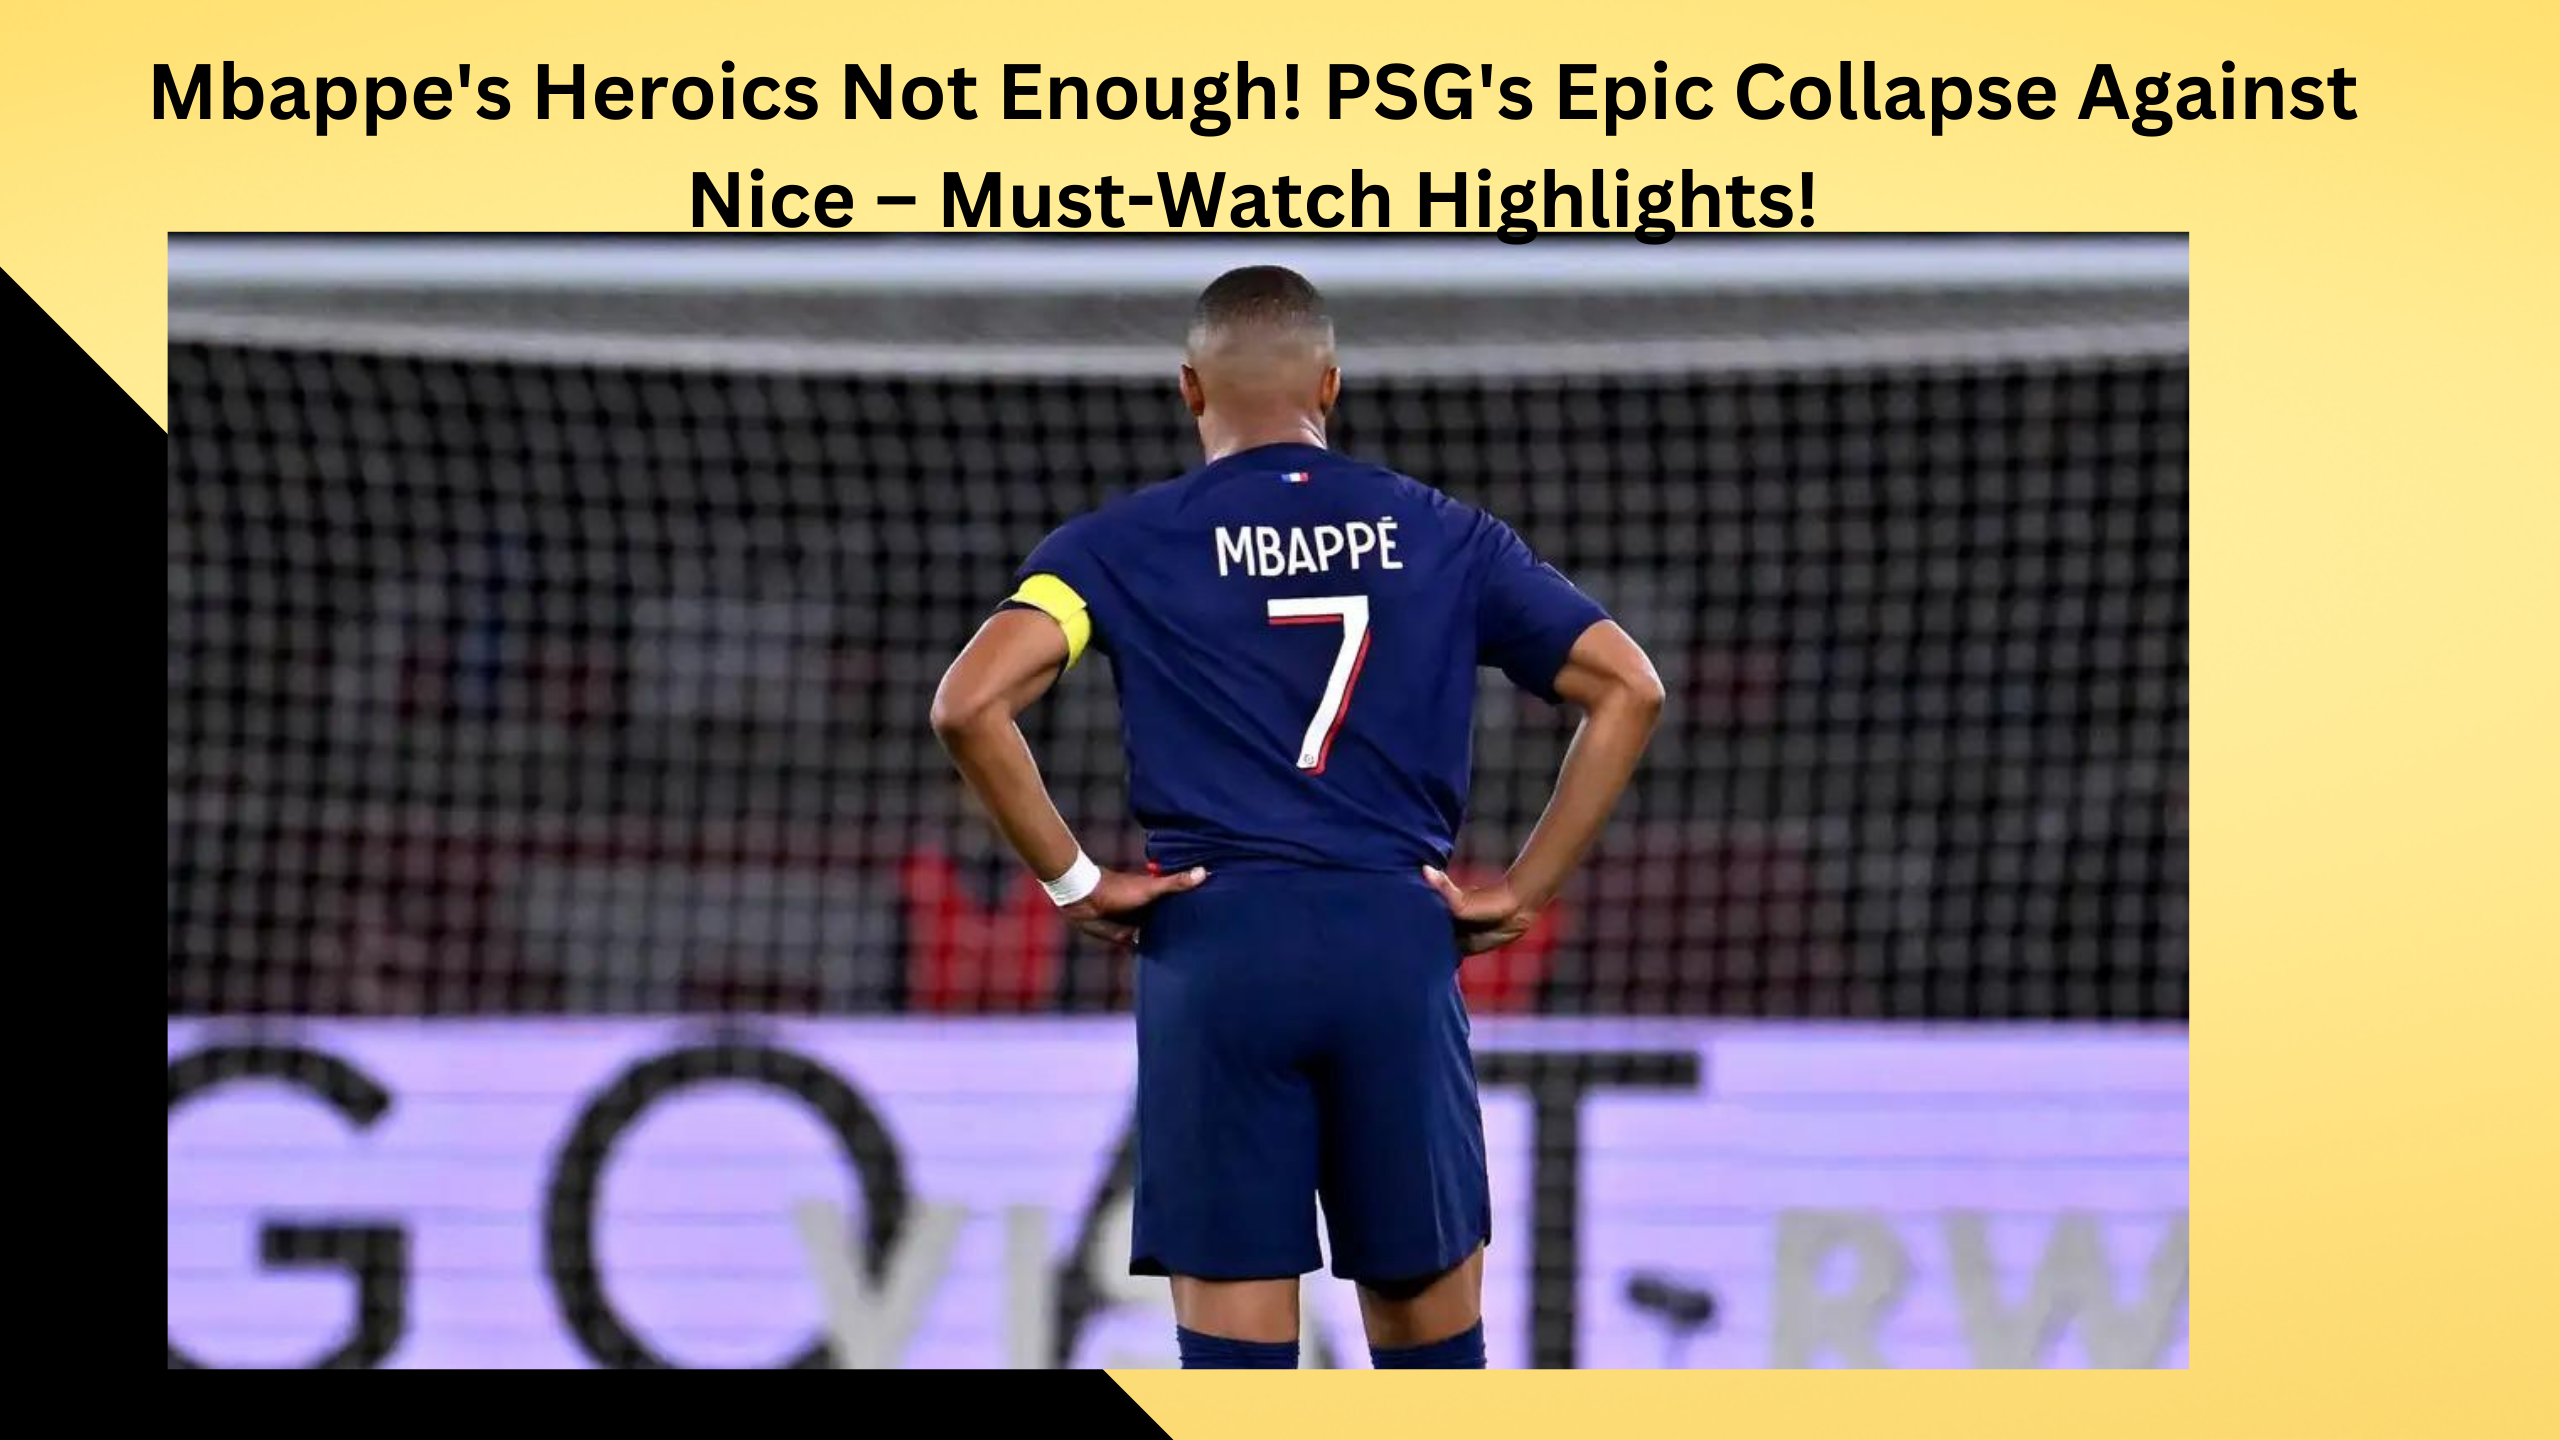 Mbappe's Heroics Not Enough! PSG's Epic Collapse Against Nice – Must-Watch Highlights